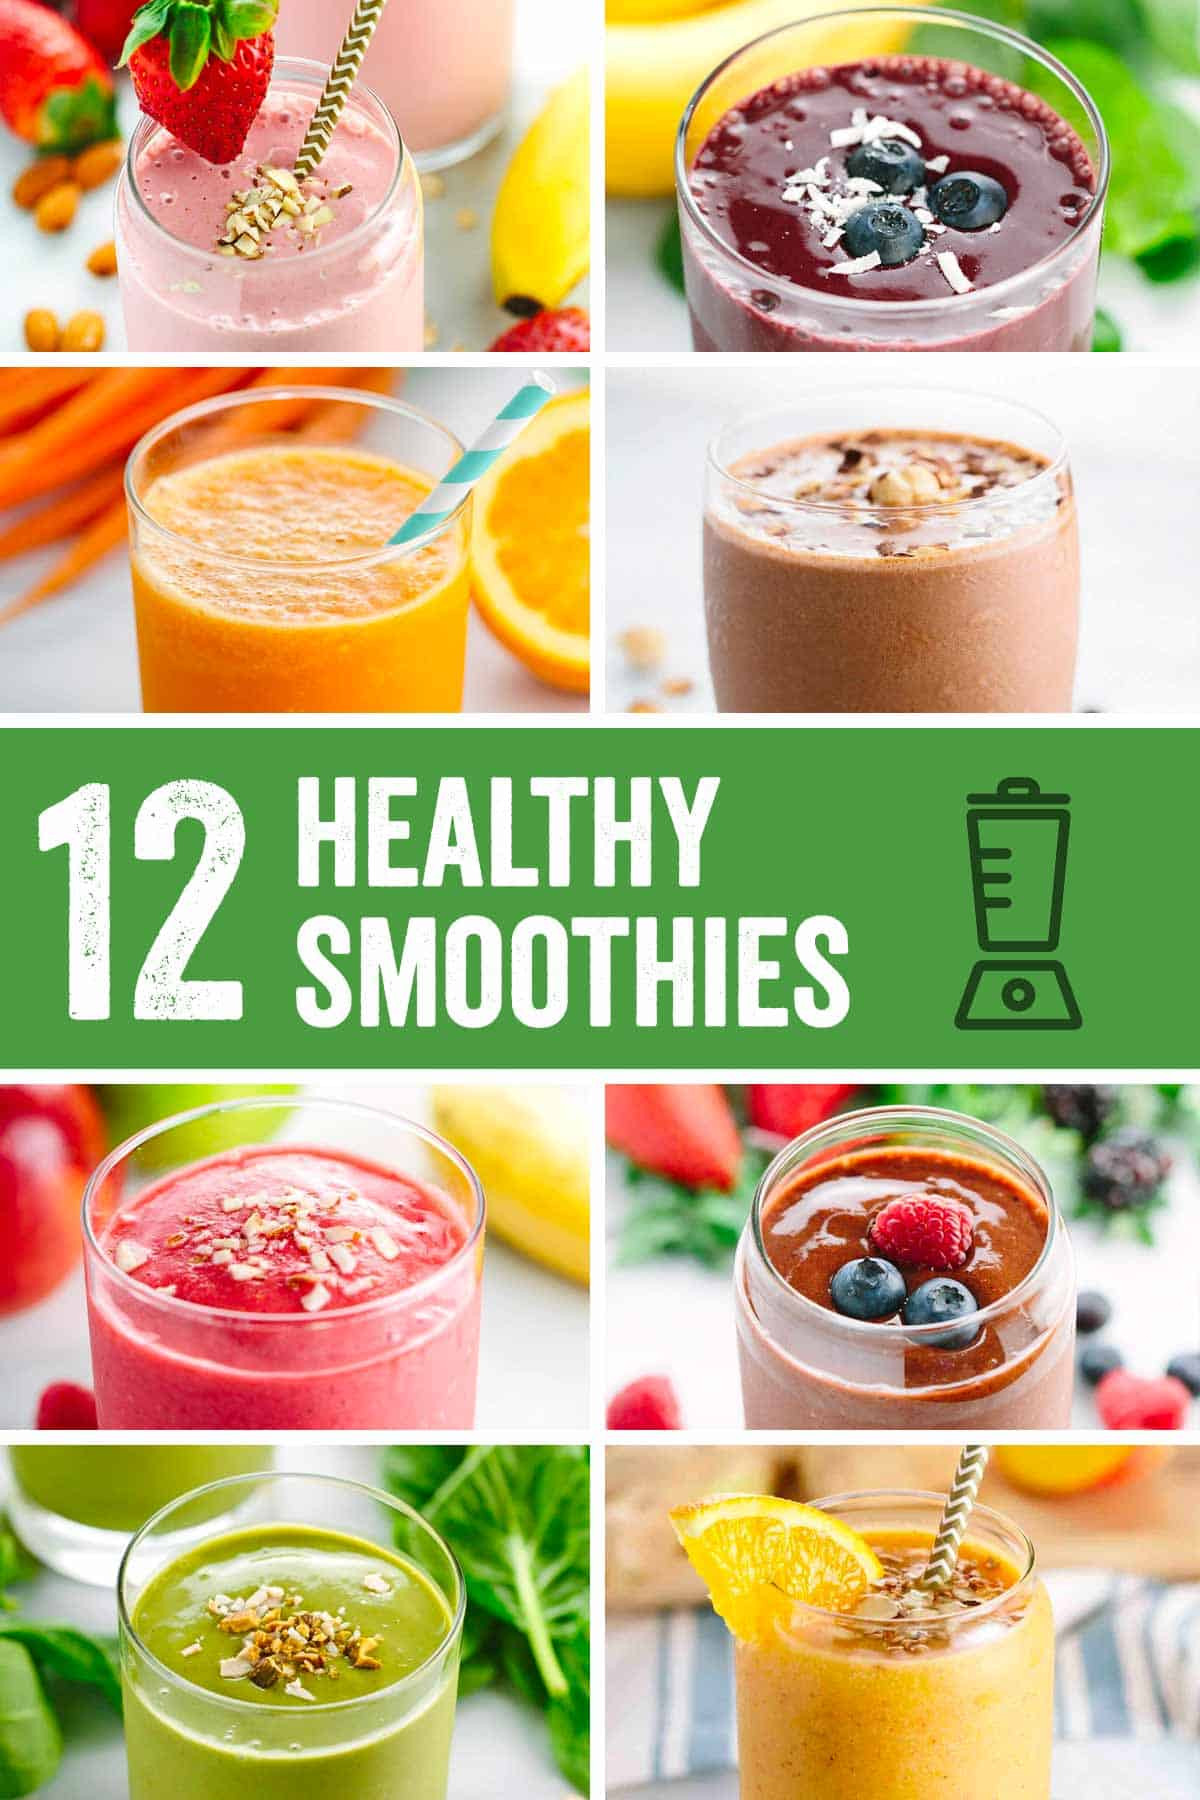 Healthy Fruit Smoothie Recipes
 Roundup Easy Five Minute Healthy Smoothie Recipes